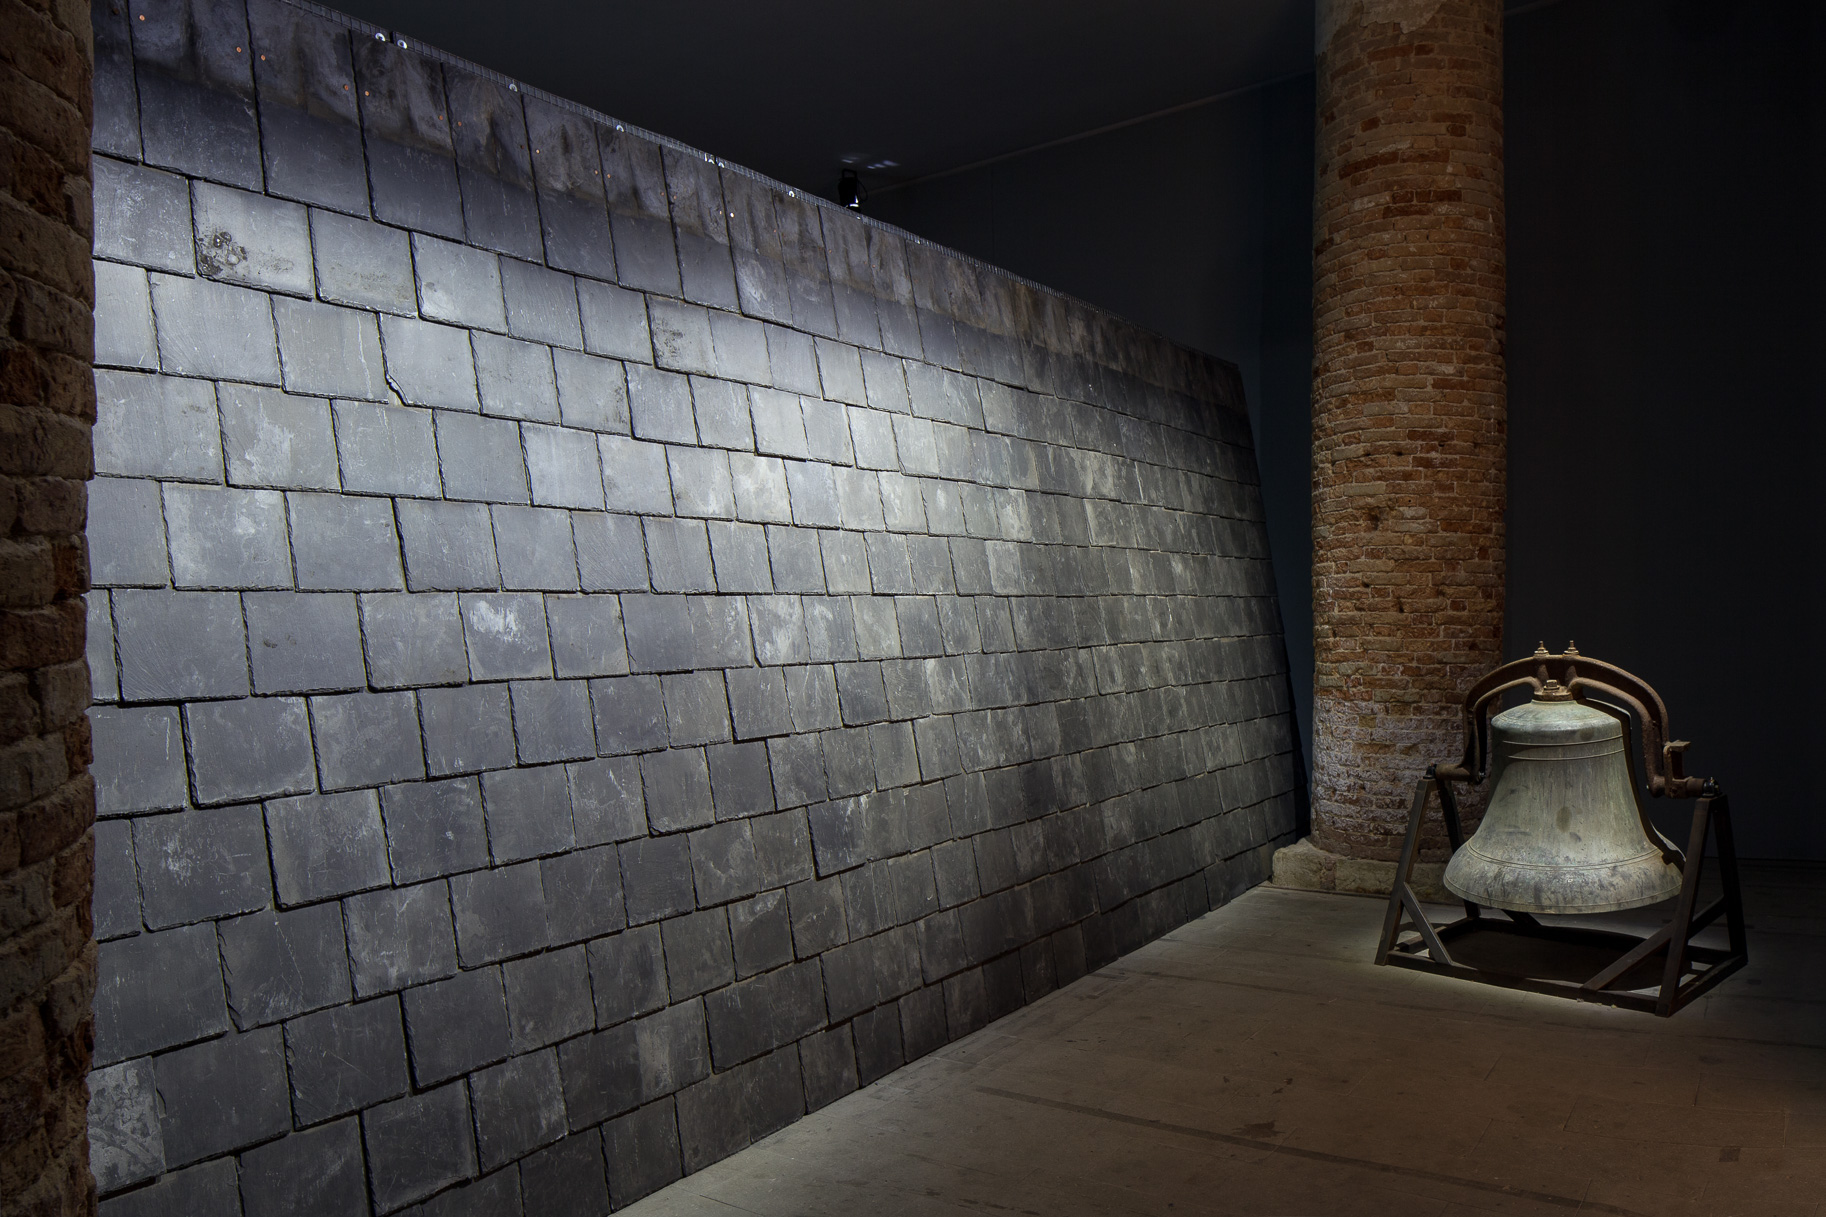 Theaster Gates, "Martyr Constrction" Venice Biennale, 2015, Corderie Arsenale - White Cube Gallery